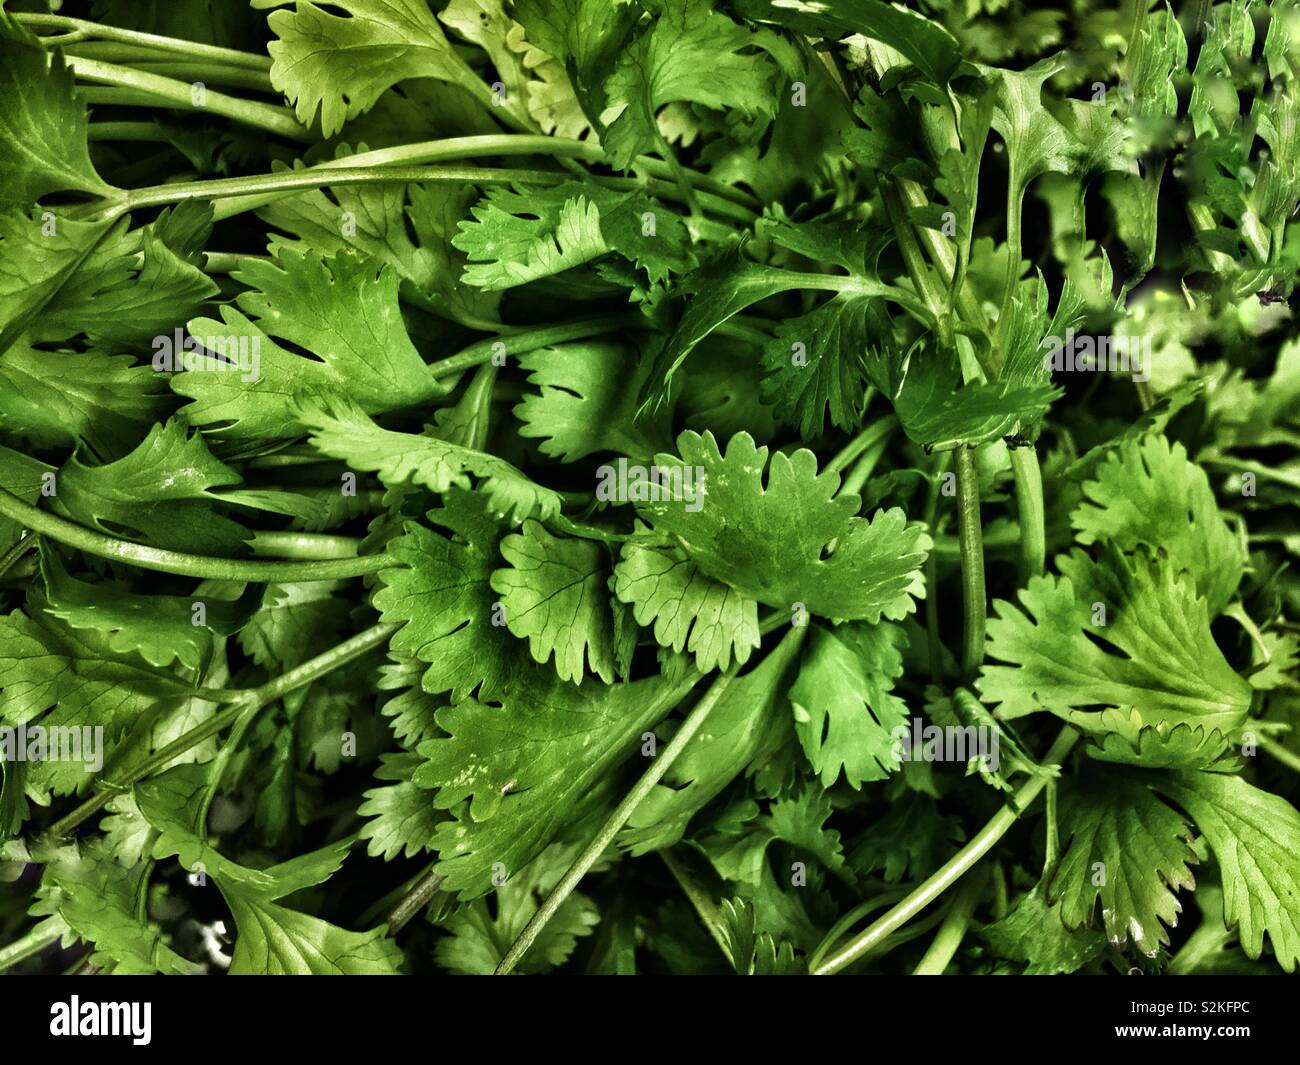 Full frame closeup of farm fresh delicious tasty crisp green cilantro leaves on display and for sale at the local produce market. Stock Photo